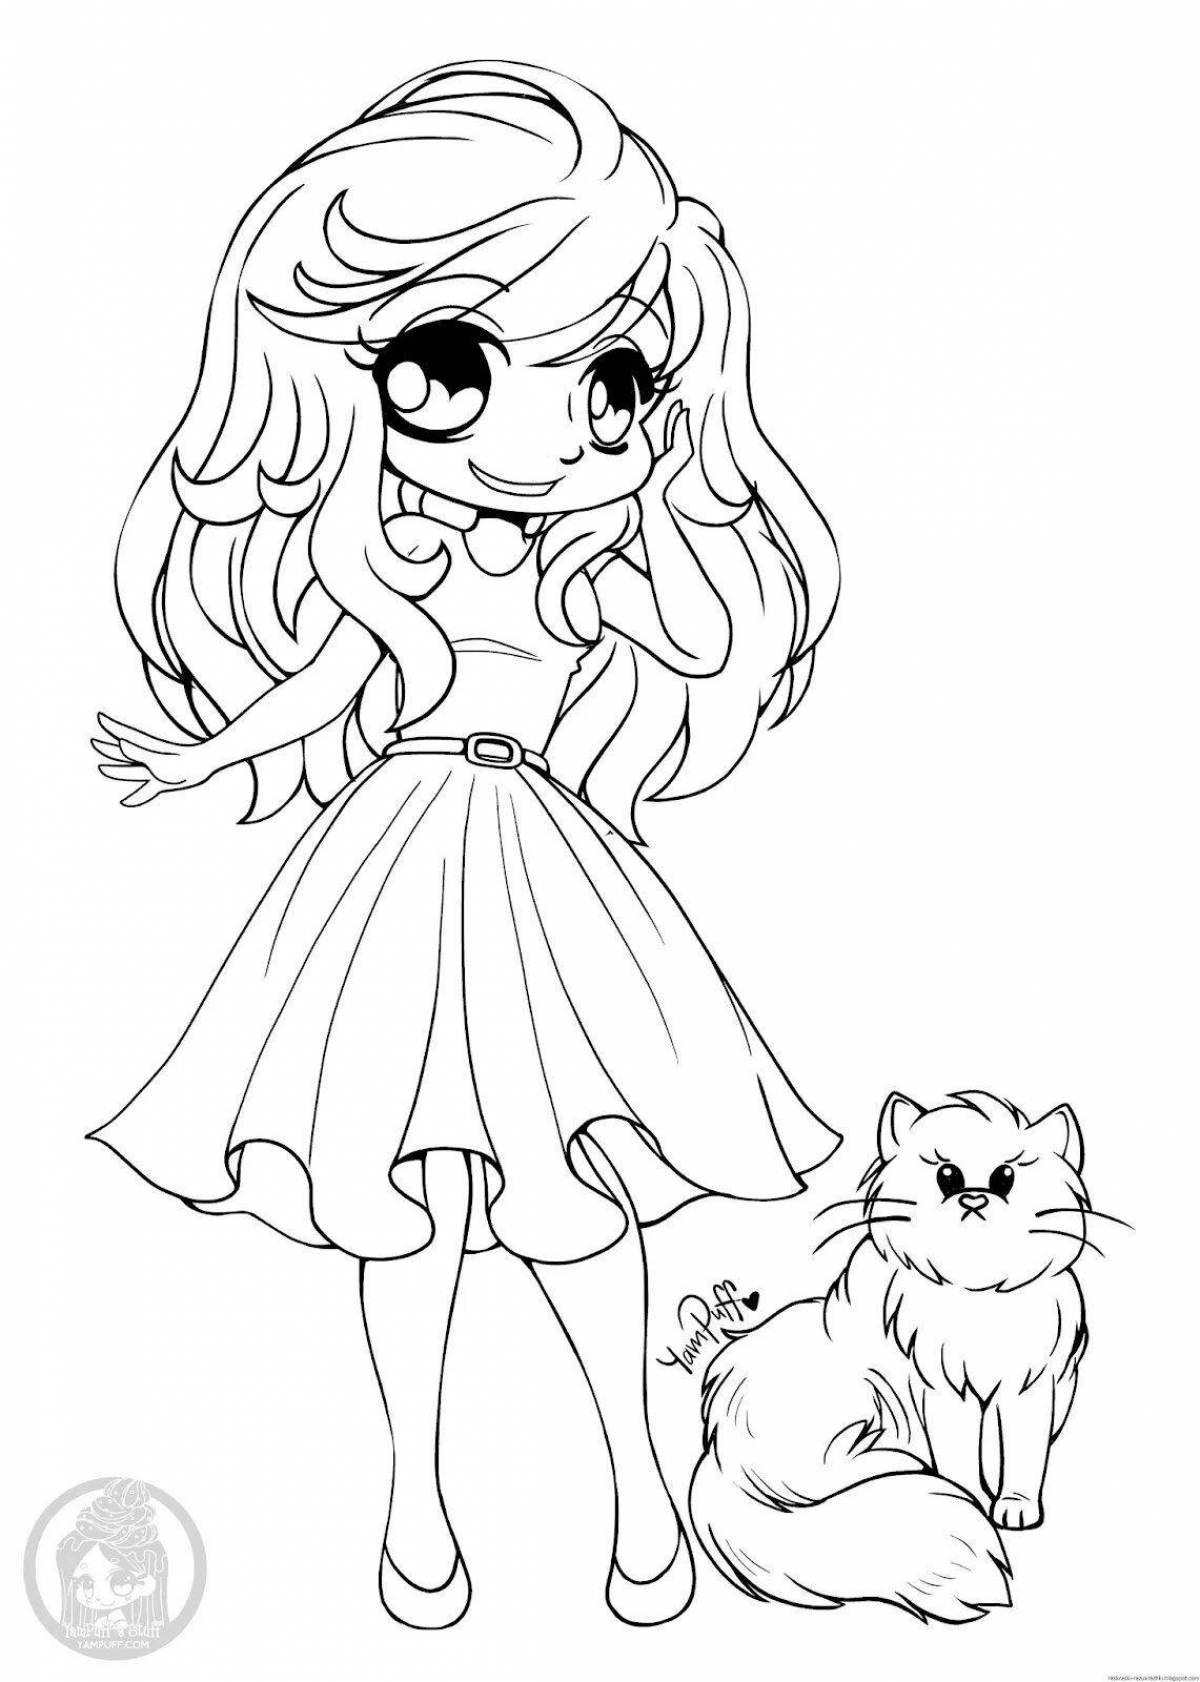 Wonderful anime animal coloring pages for girls